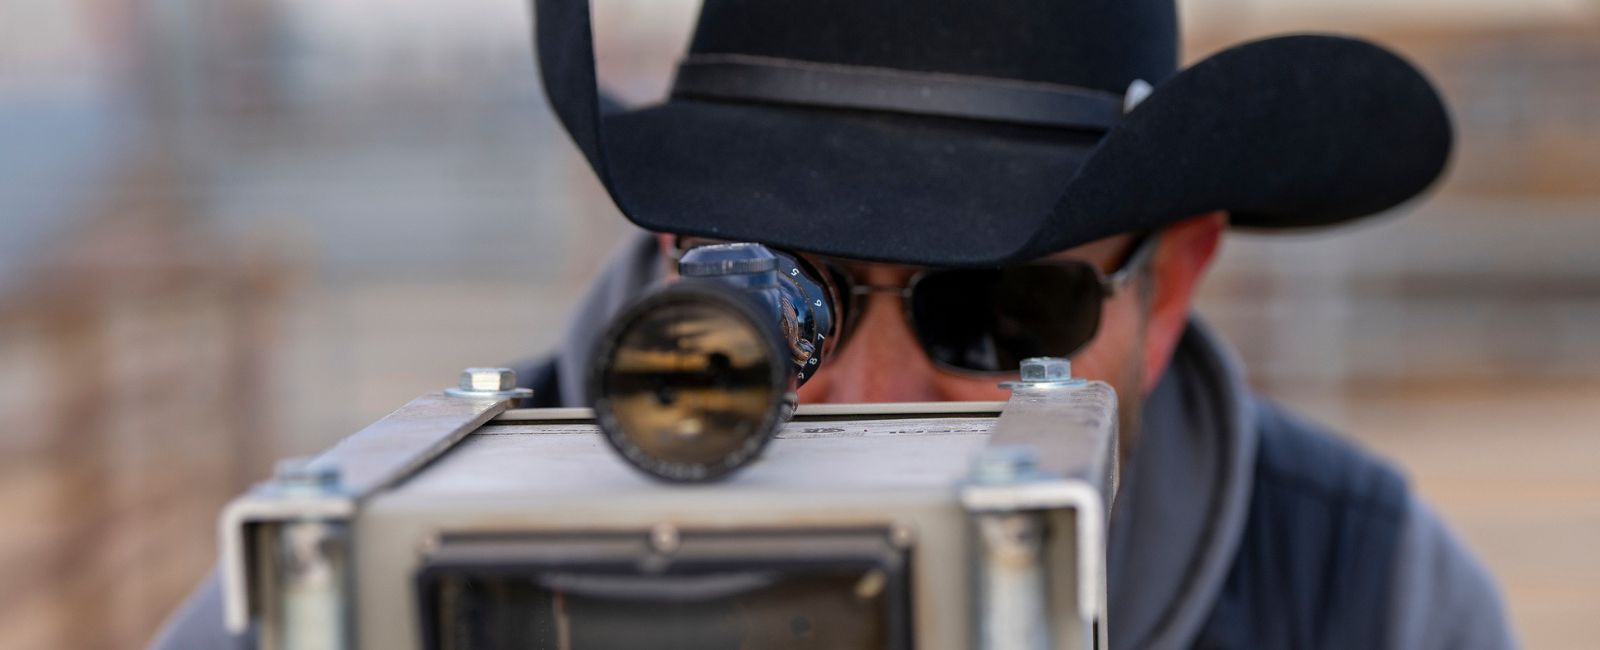 Close-up image of man in cowboy hat looking through a scope attached to a small metal box